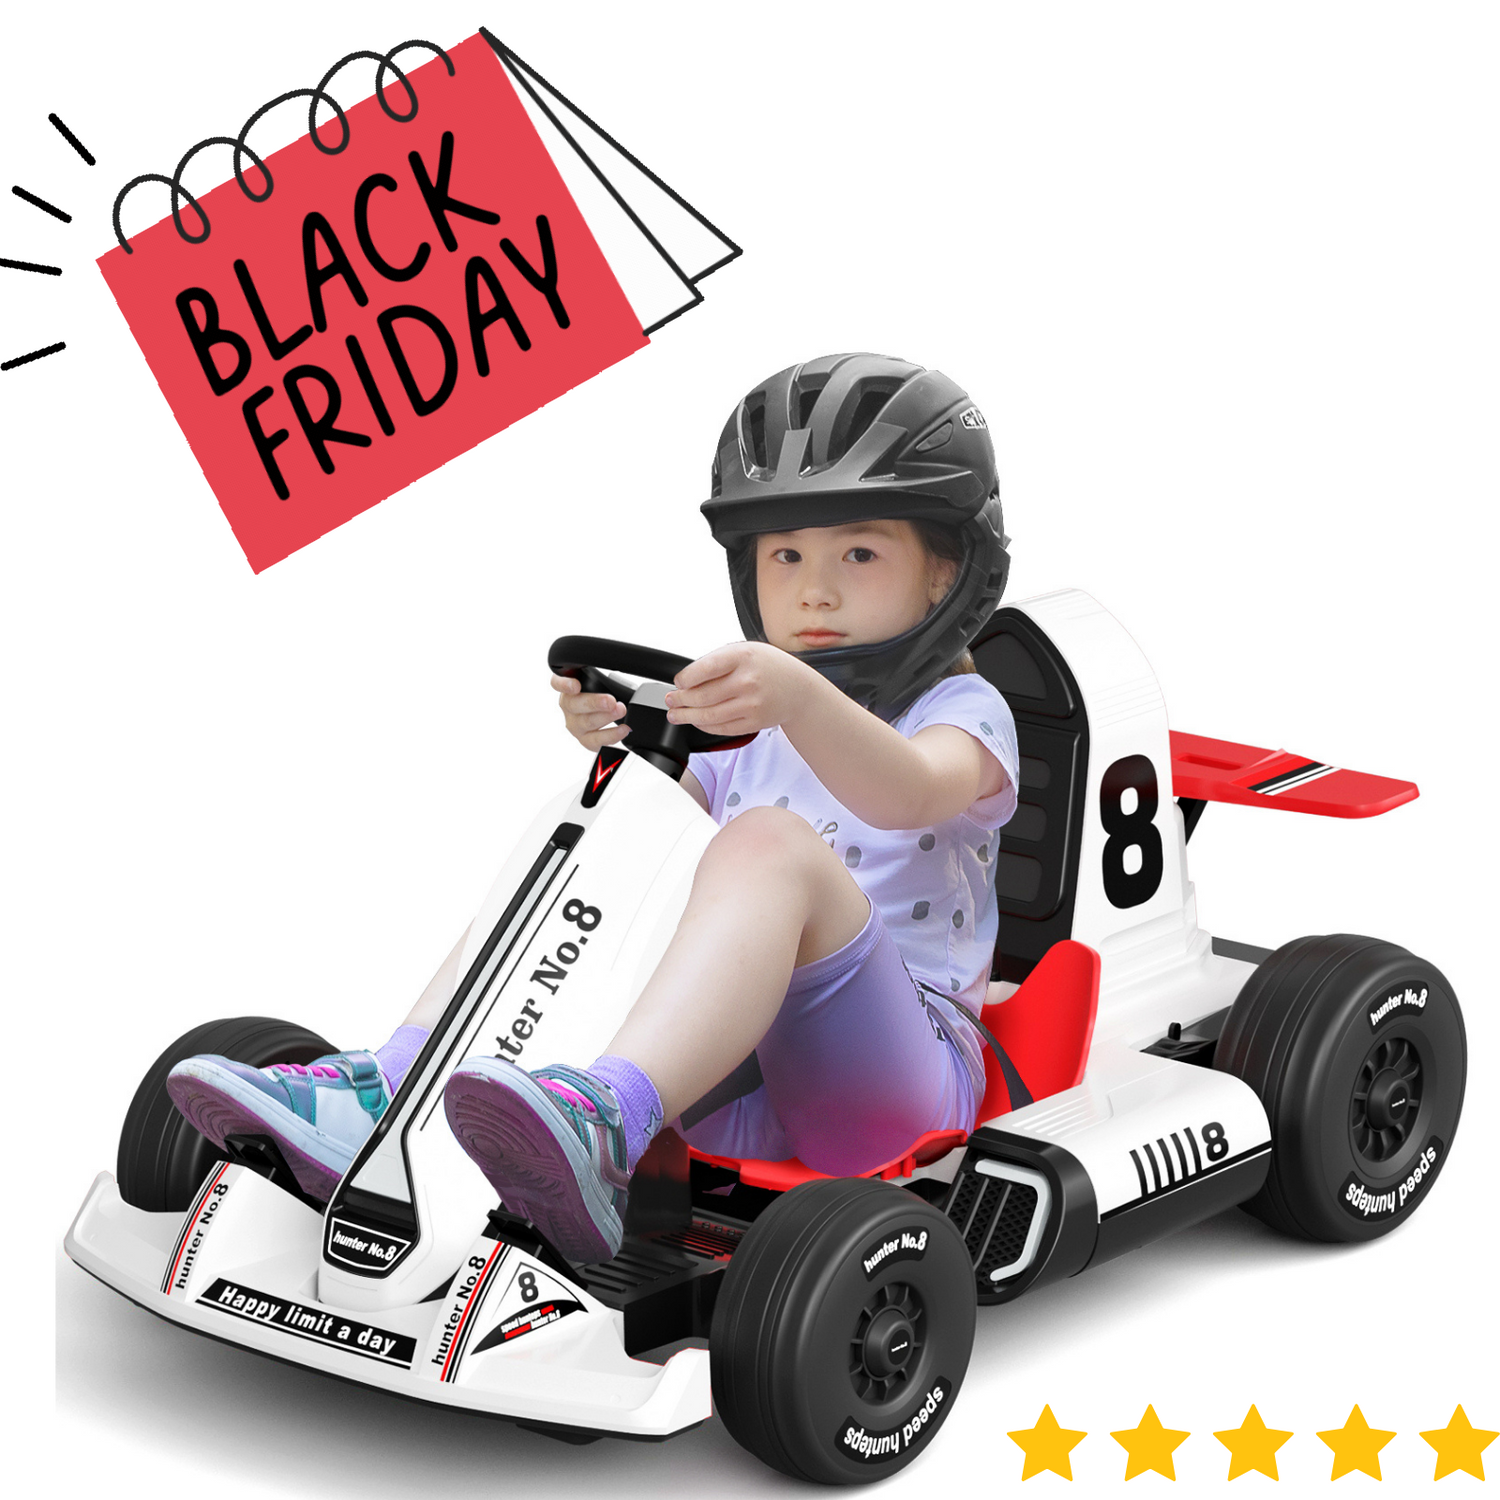 Black Friday Bliss: Elevate the Holiday Spirit with 15% Off on Our Ultimate Kids' Gifts!